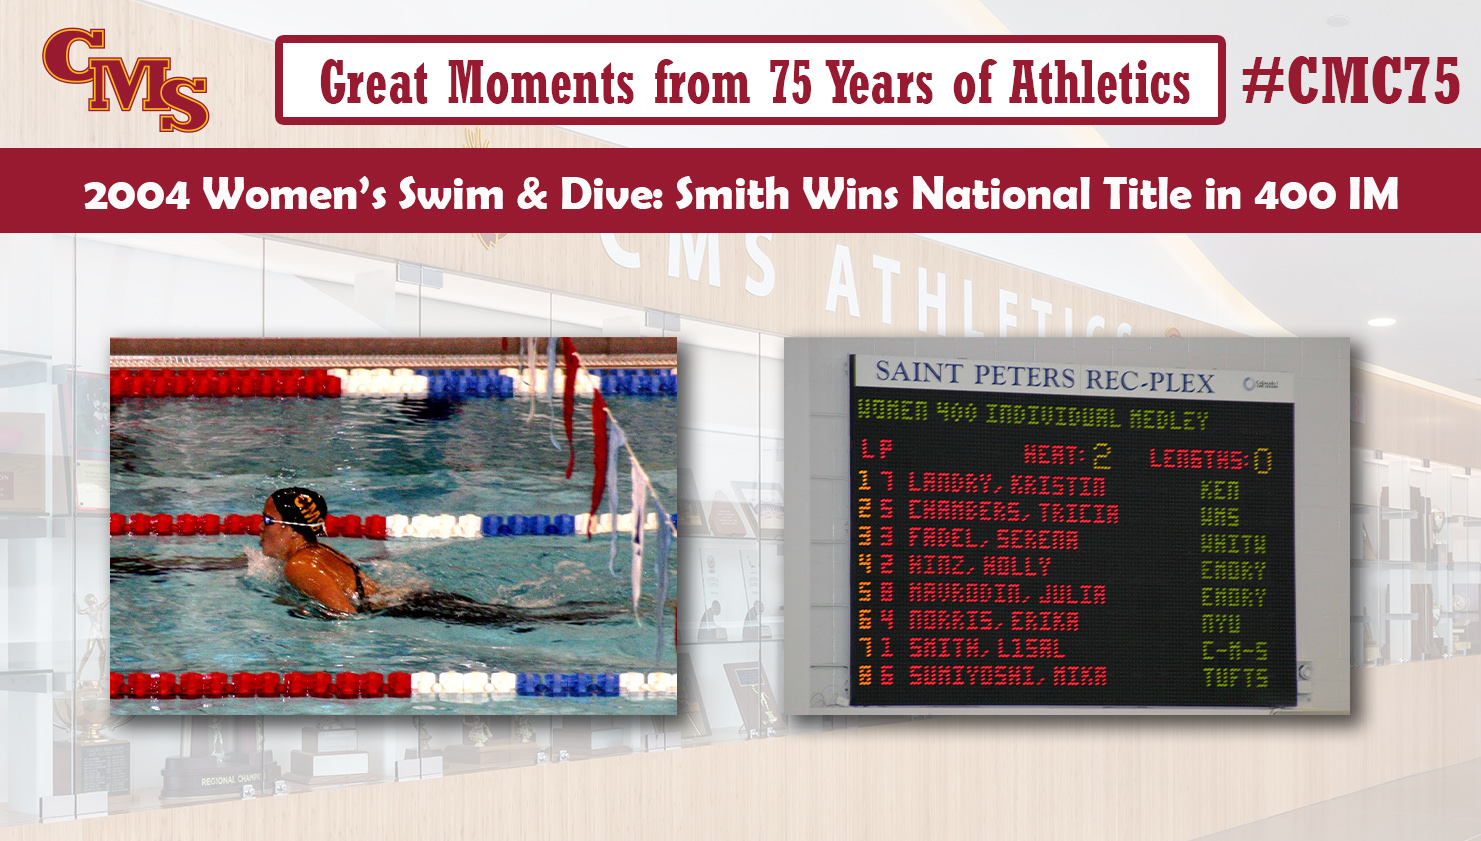 Lisal Smith in action in the 400IM and the scoreboard showing she won. Words over the photo read: Great Moments from 75 Years of Athletics, 2004 Women's Swim & Dive: Smith Wins National Title in 400IM